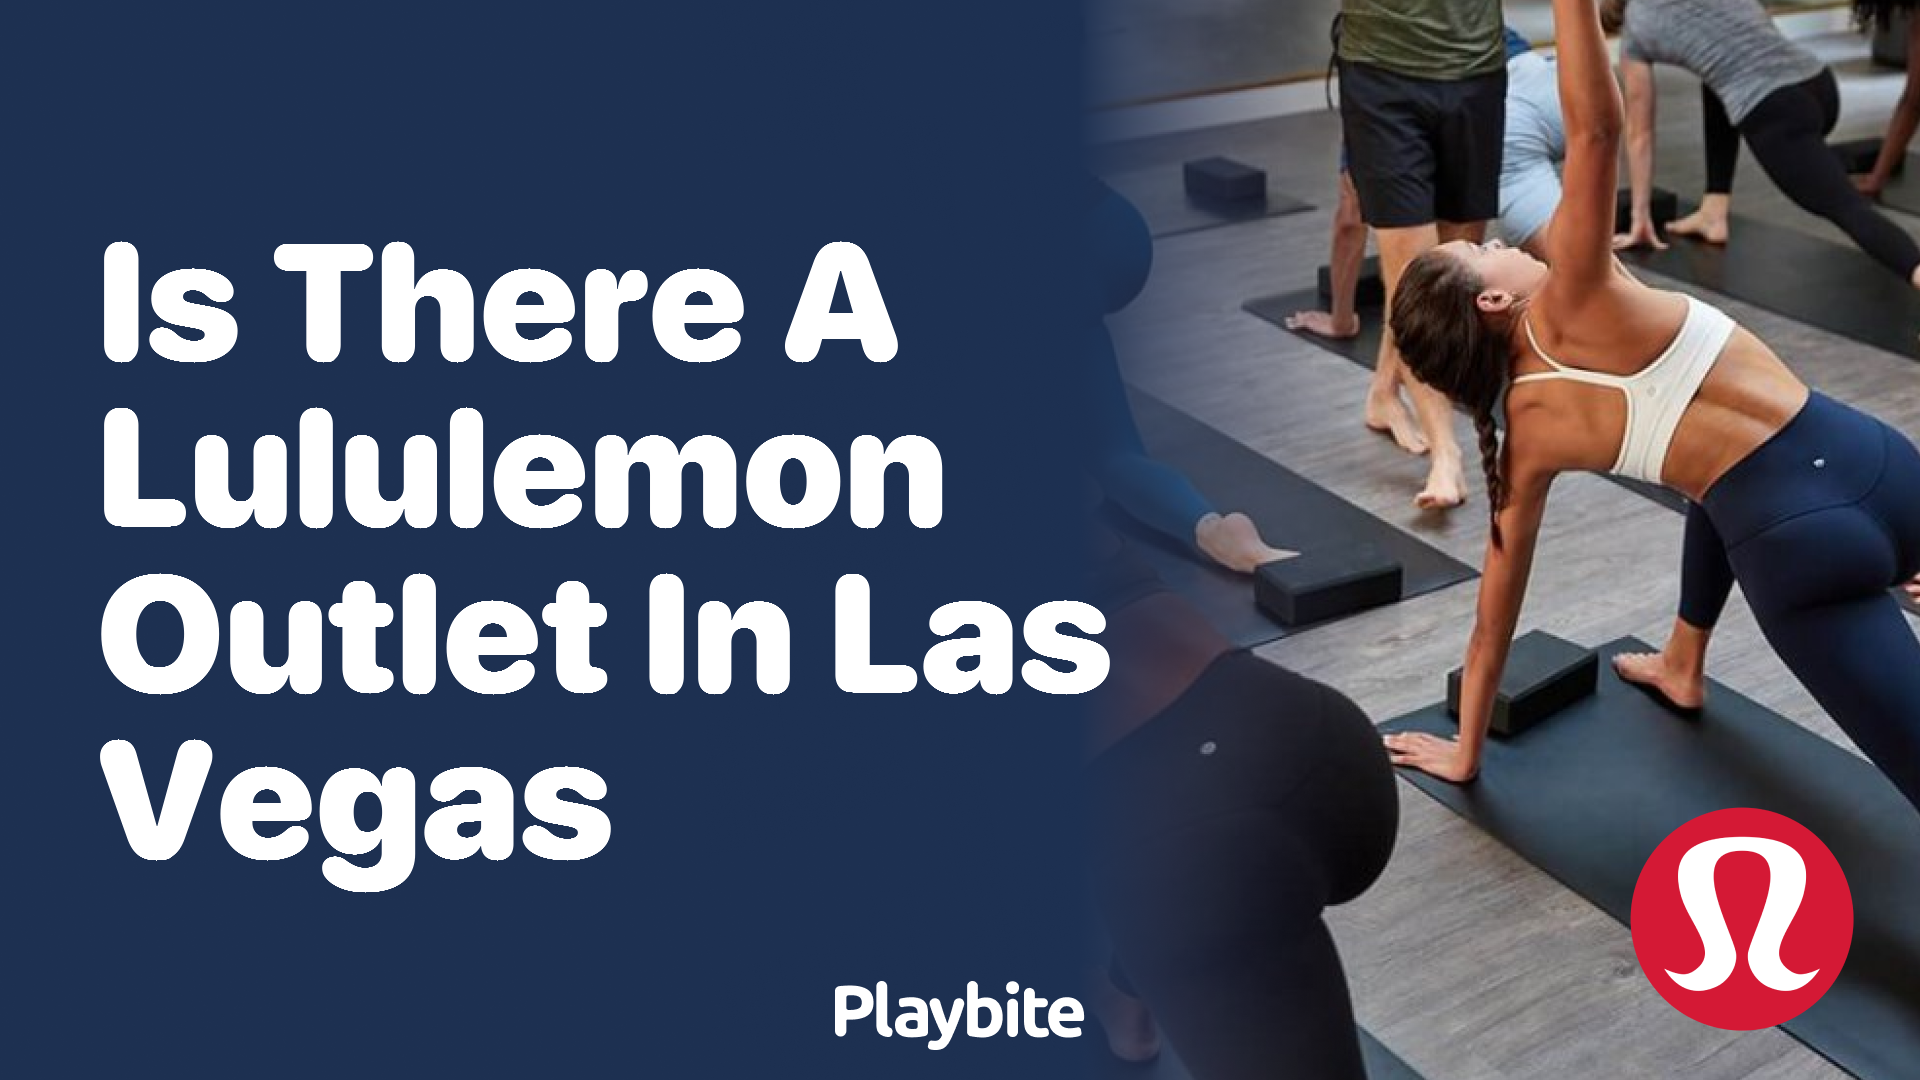 Is There a Lululemon Outlet in Las Vegas? - Playbite